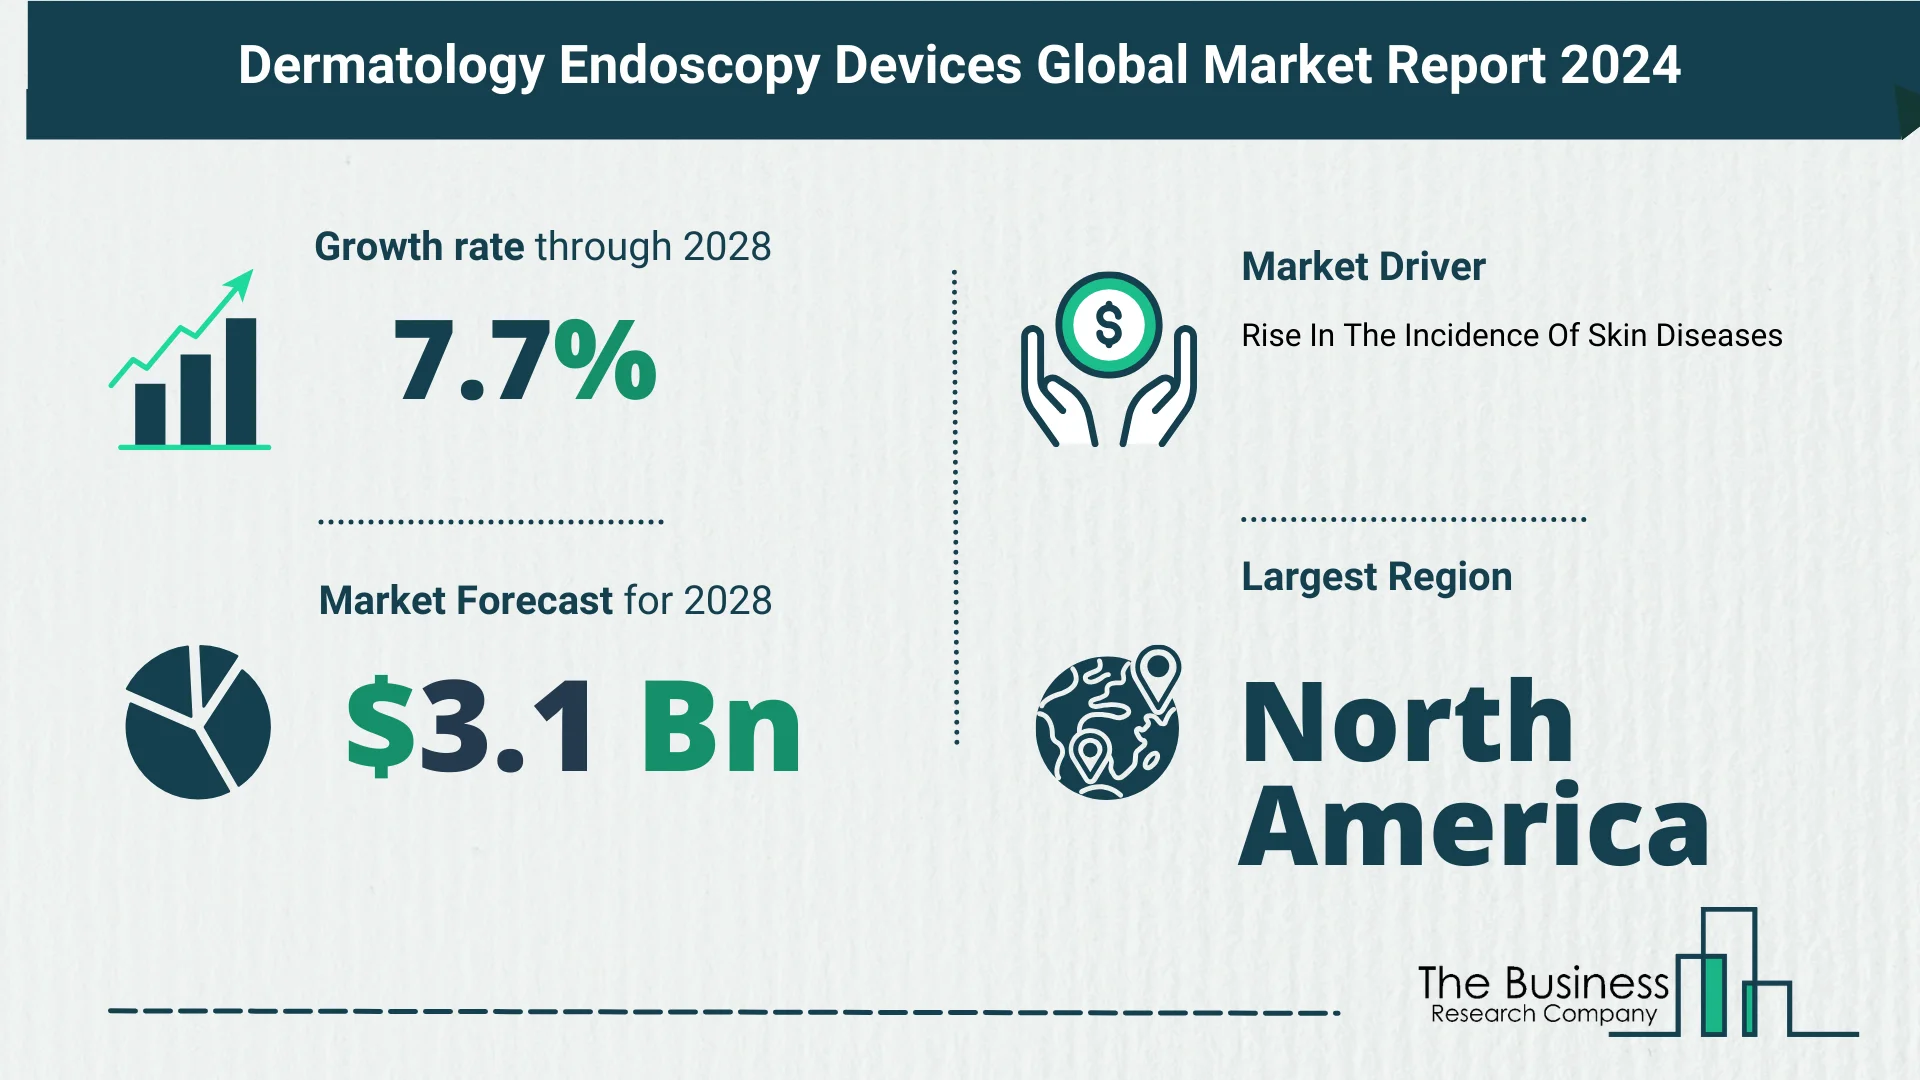 What Is The Forecast Growth Rate For The Dermatology Endoscopy Devices Market?